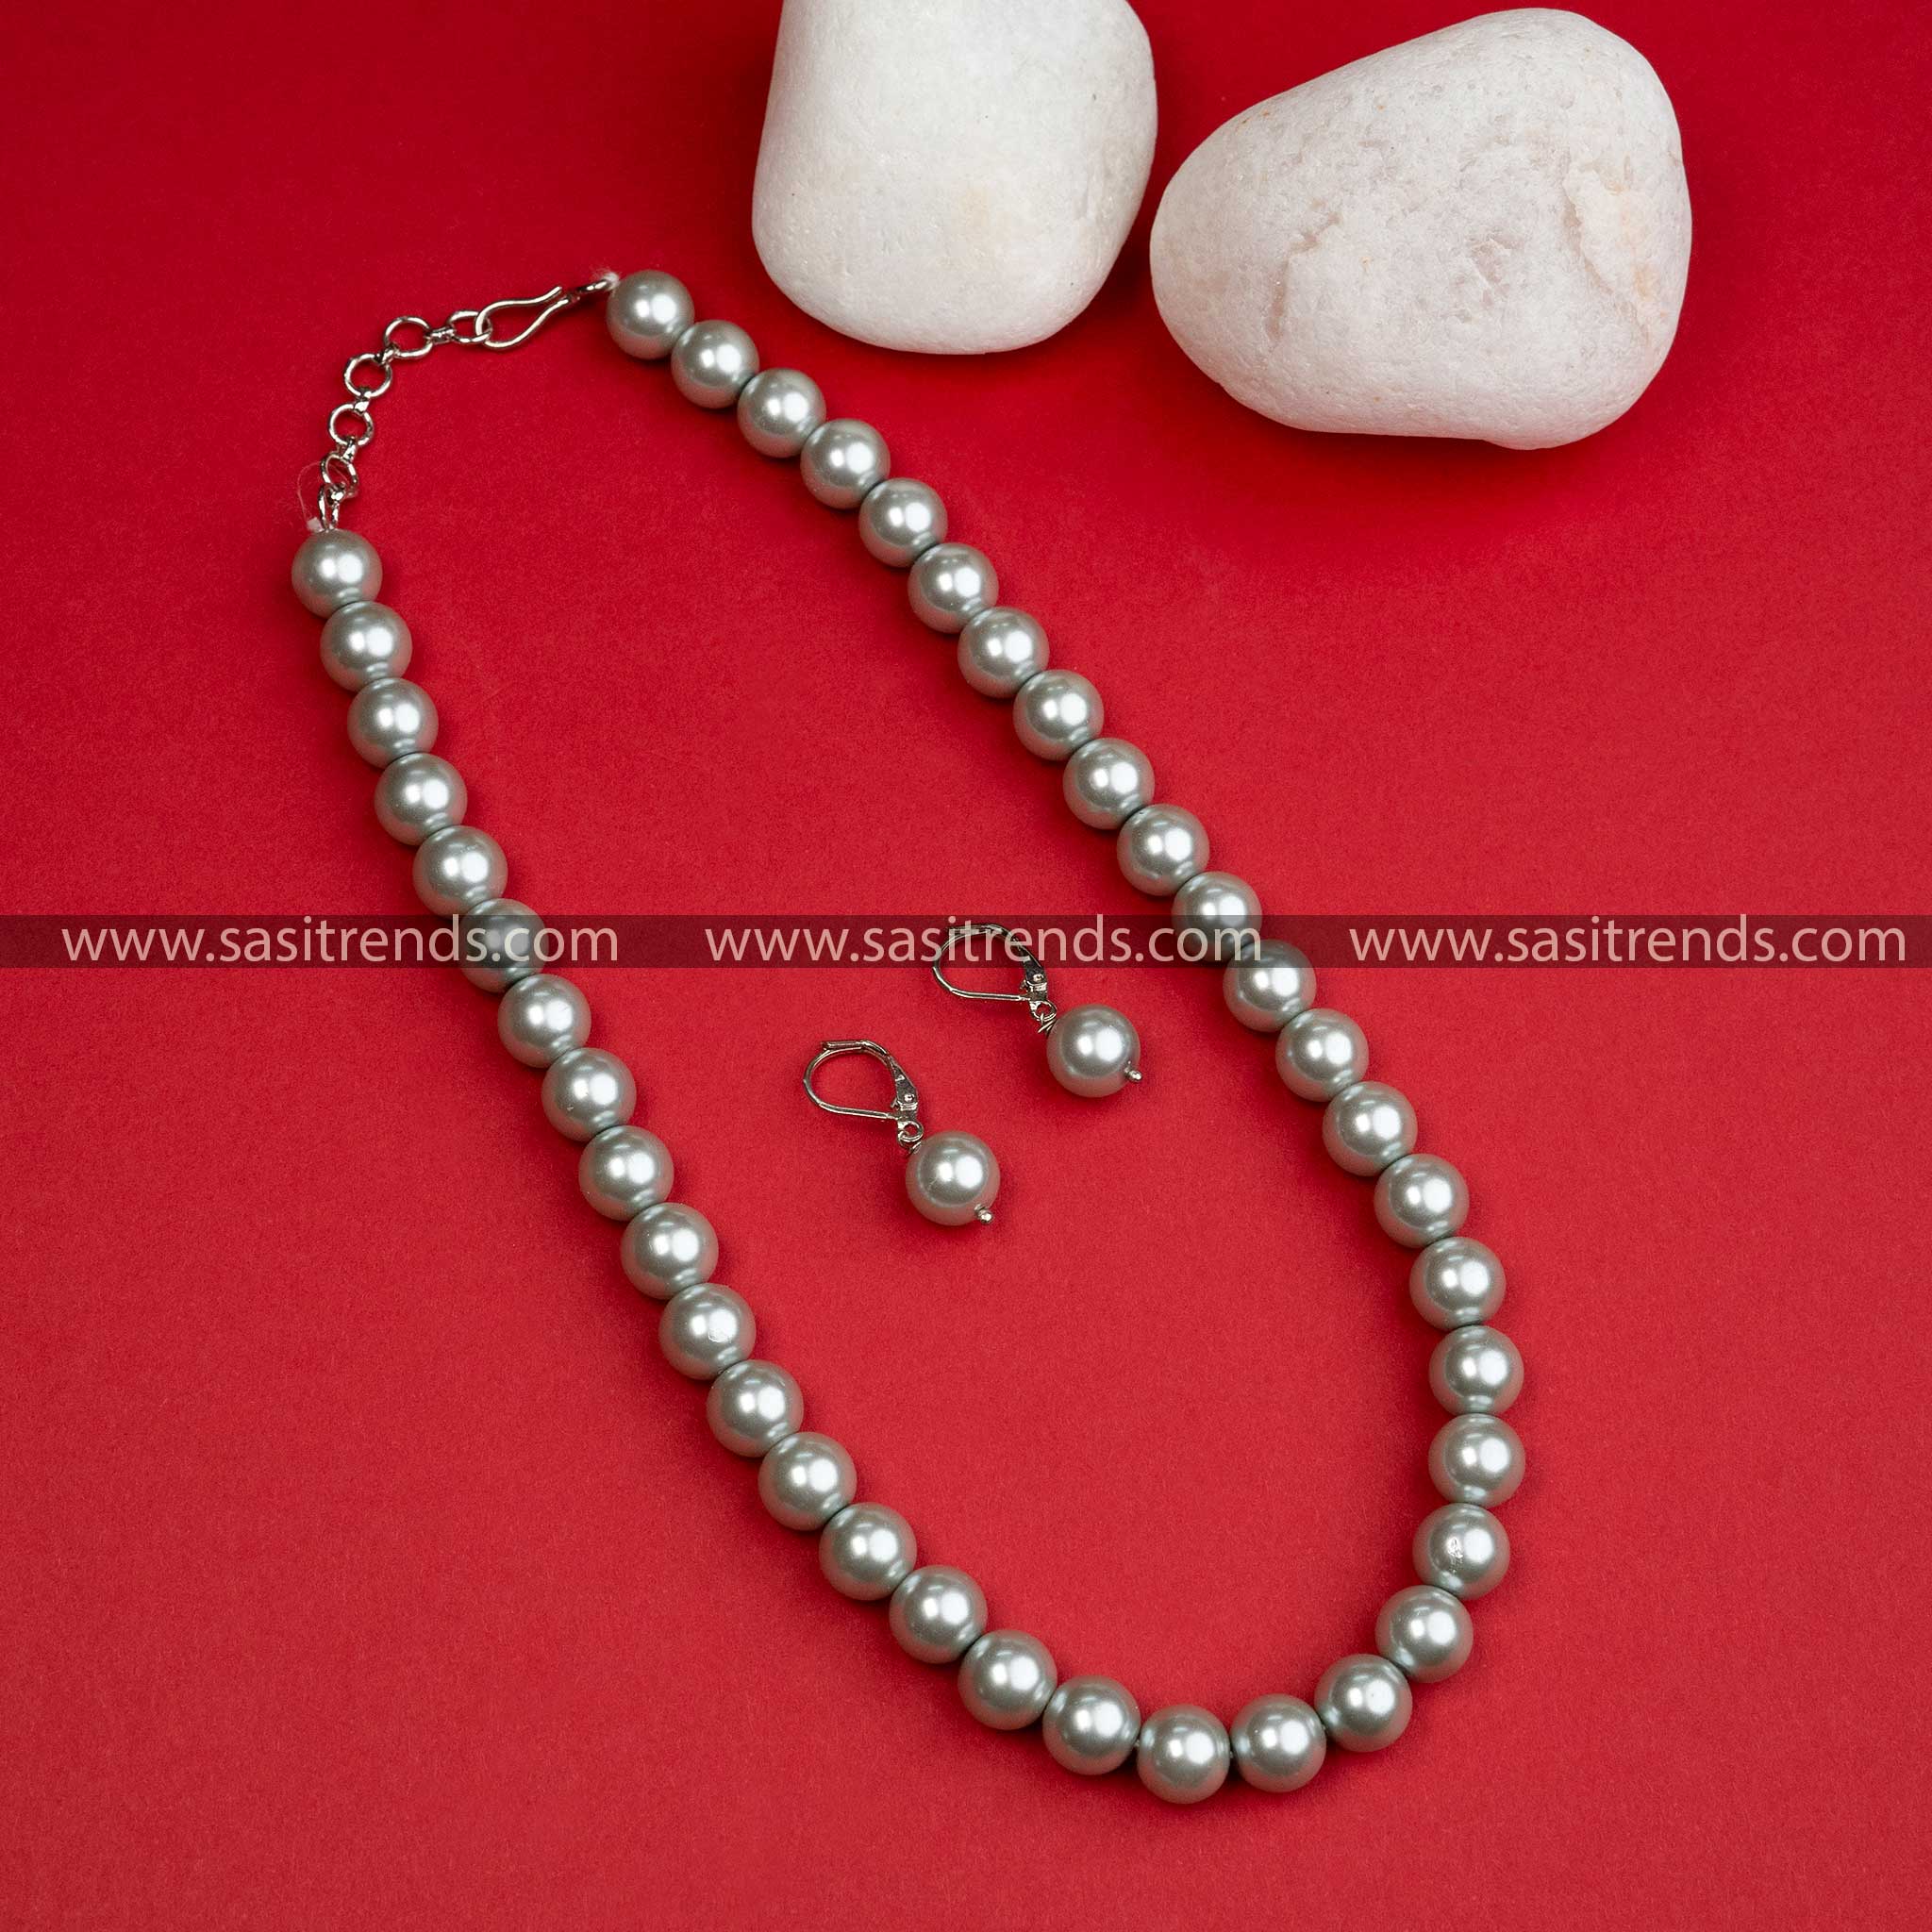 20-inch silver-grey pearl necklace with magnetic clasp - 88London